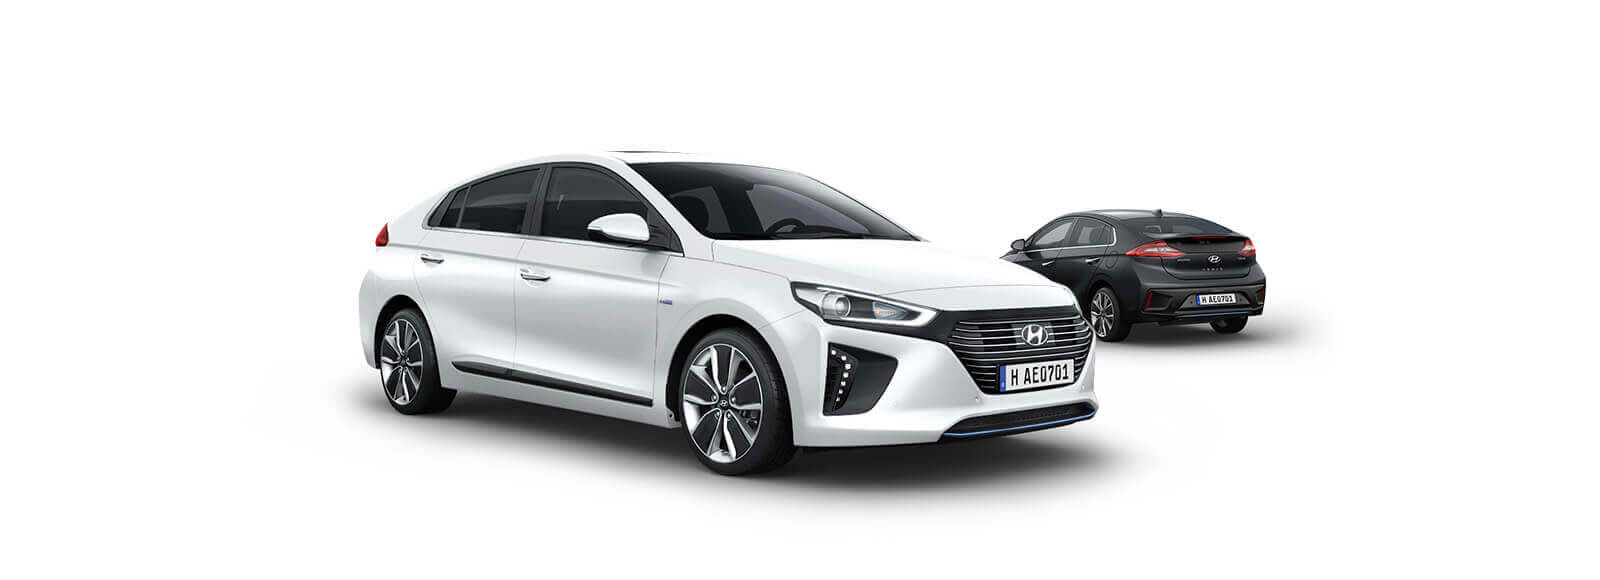 Side view of white Ioniq Hybrid in front and black Ioniq Hybrid parked behind